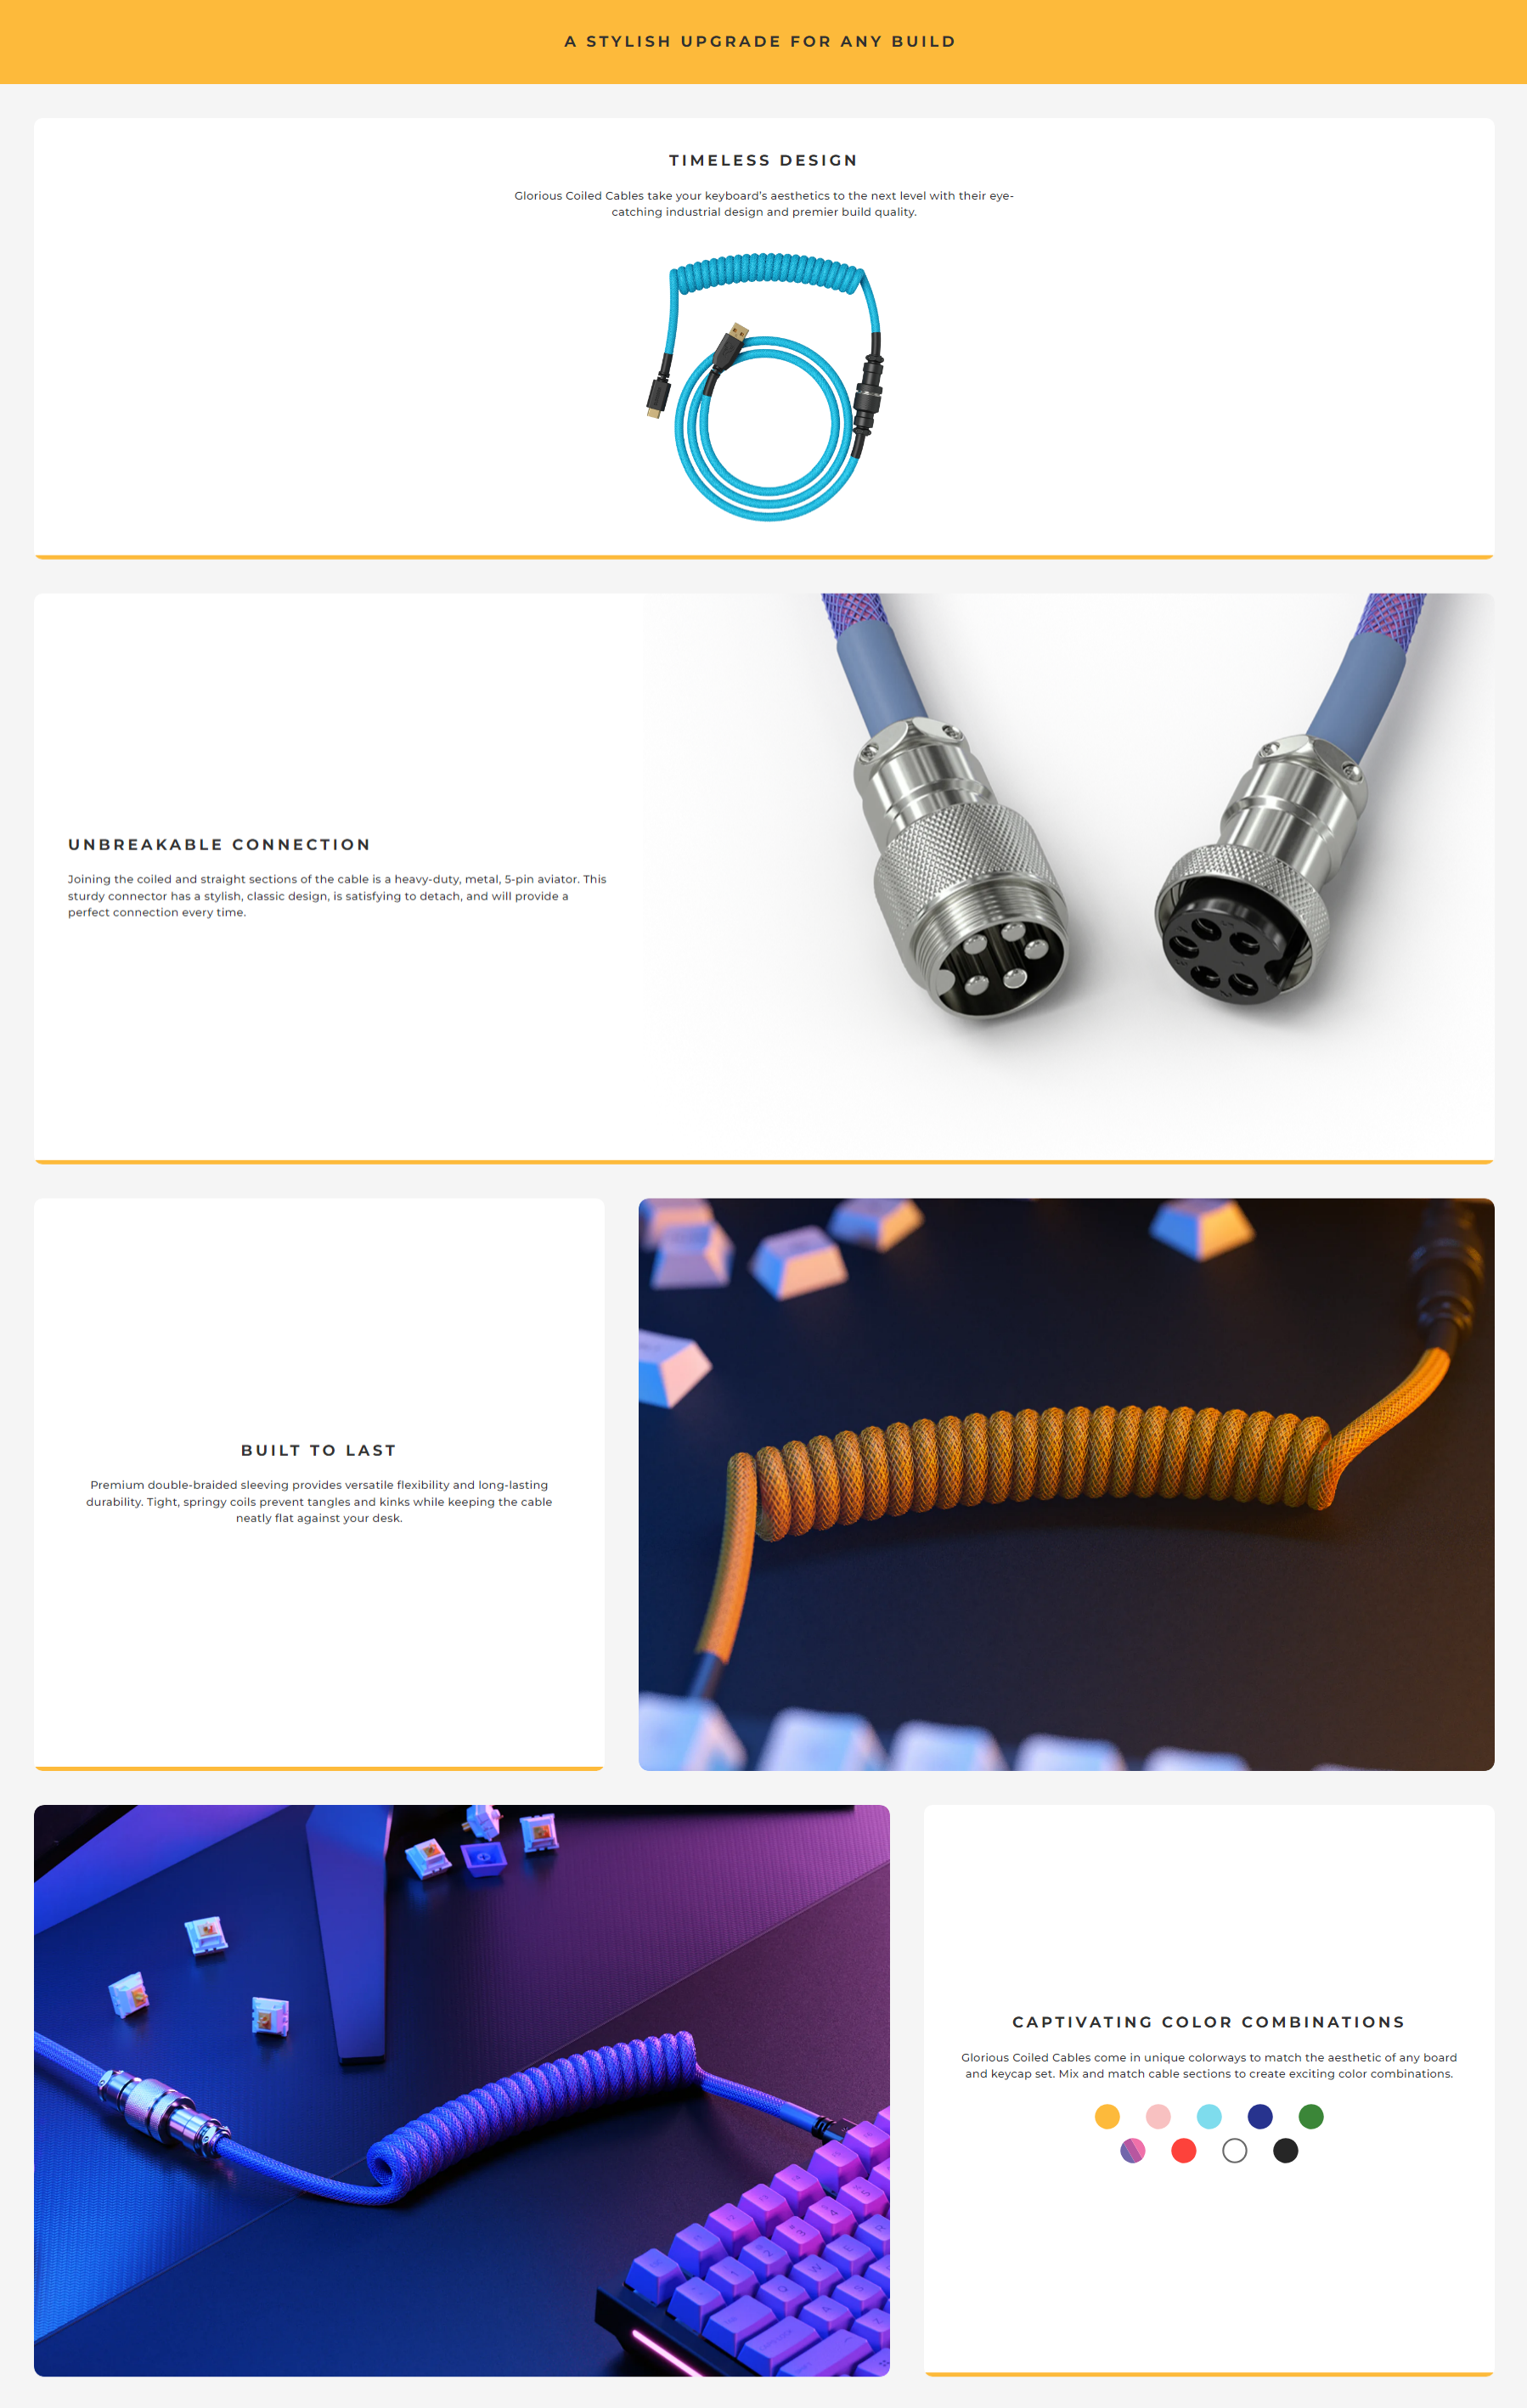 A large marketing image providing additional information about the product Glorious Coiled USB-C Keyboard Cable - Phantom Black - Additional alt info not provided